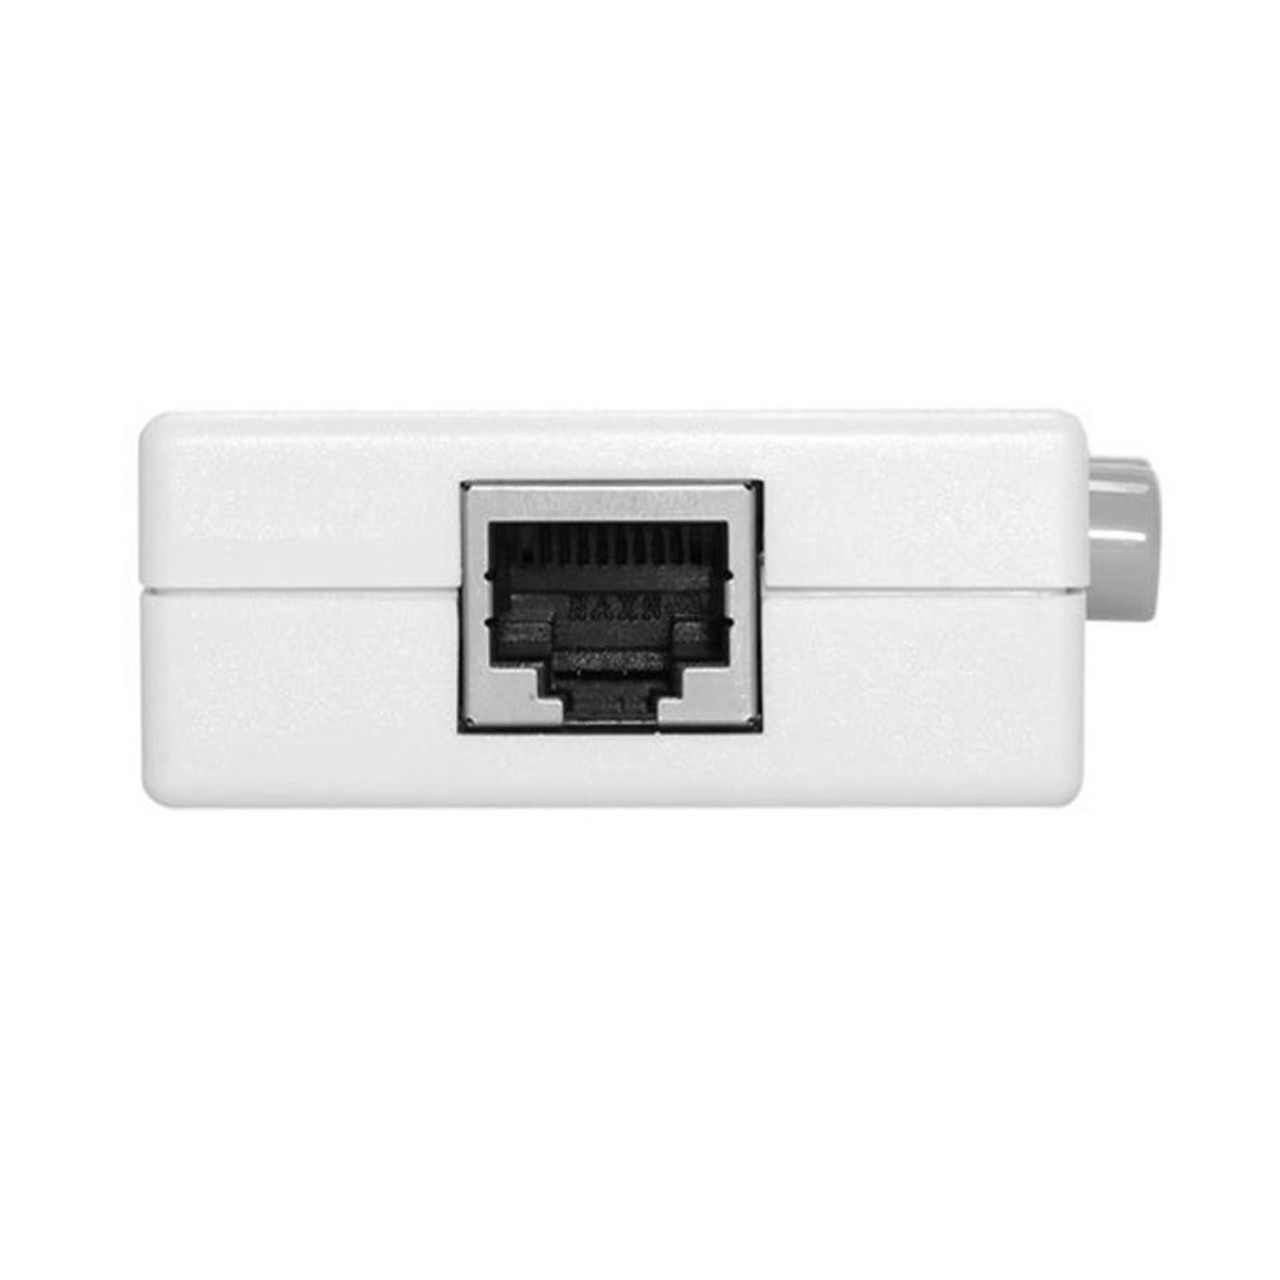 Statusbright 2 Ports RJ45 LAN CAT6 Network Switch Selector 100MHz 2 in 1  Out/1 in 2 Out Internal External Network Switcher Splitter Box Network  Switch - Statusbright 